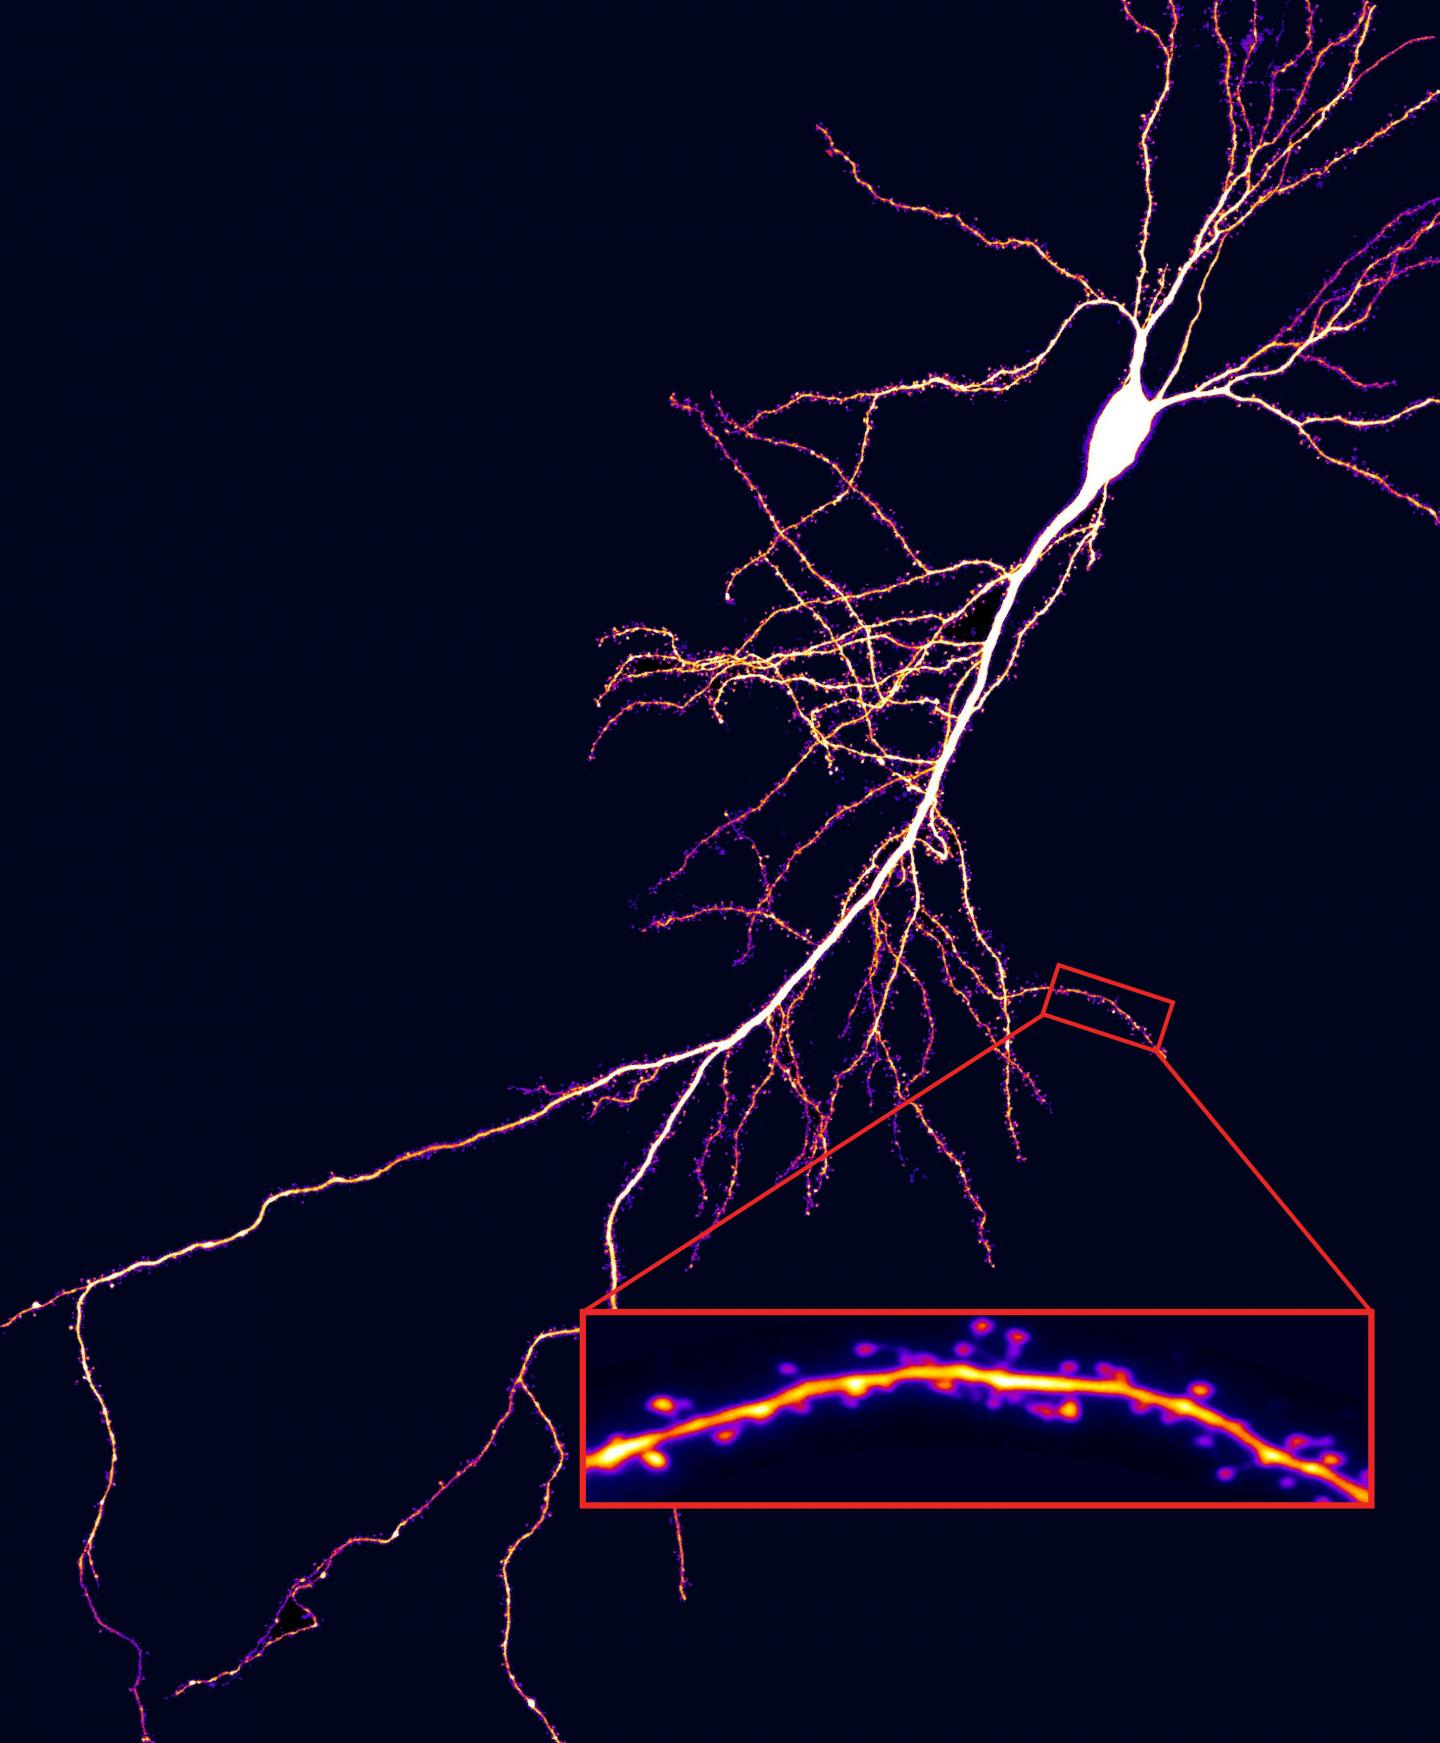 Dendritic Spinds are Visible on a Micrograph of a Hippocampal Neuron